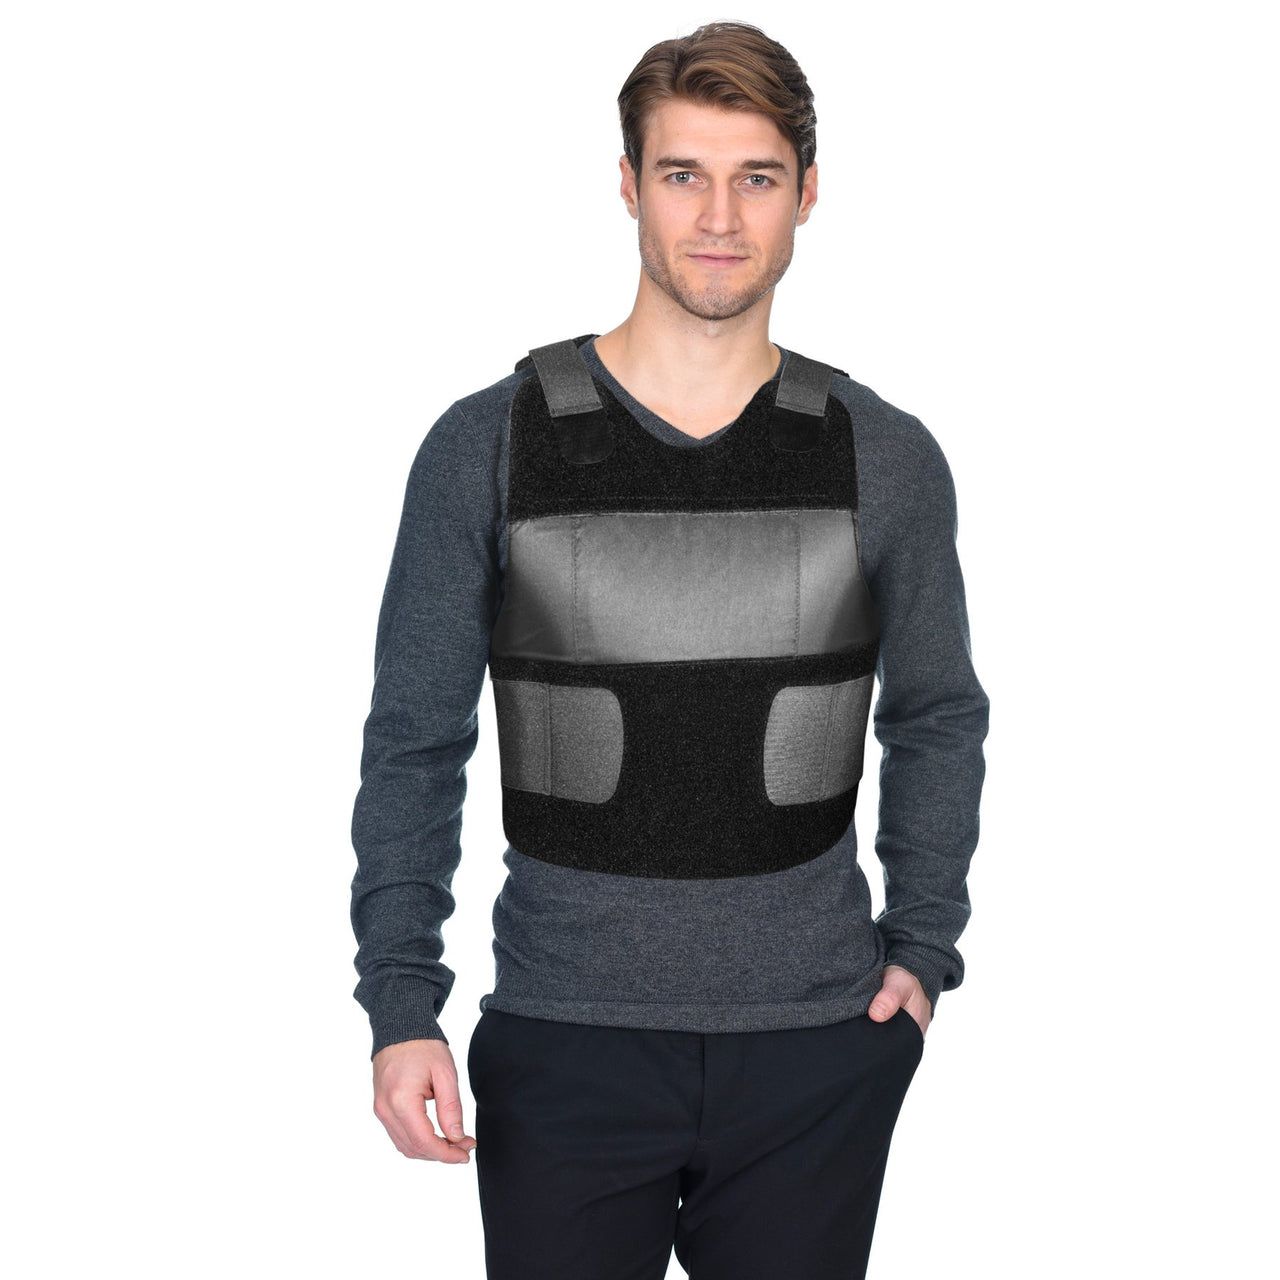 A man wearing a Body Armor Direct Freedom Concealable Carrier vest.